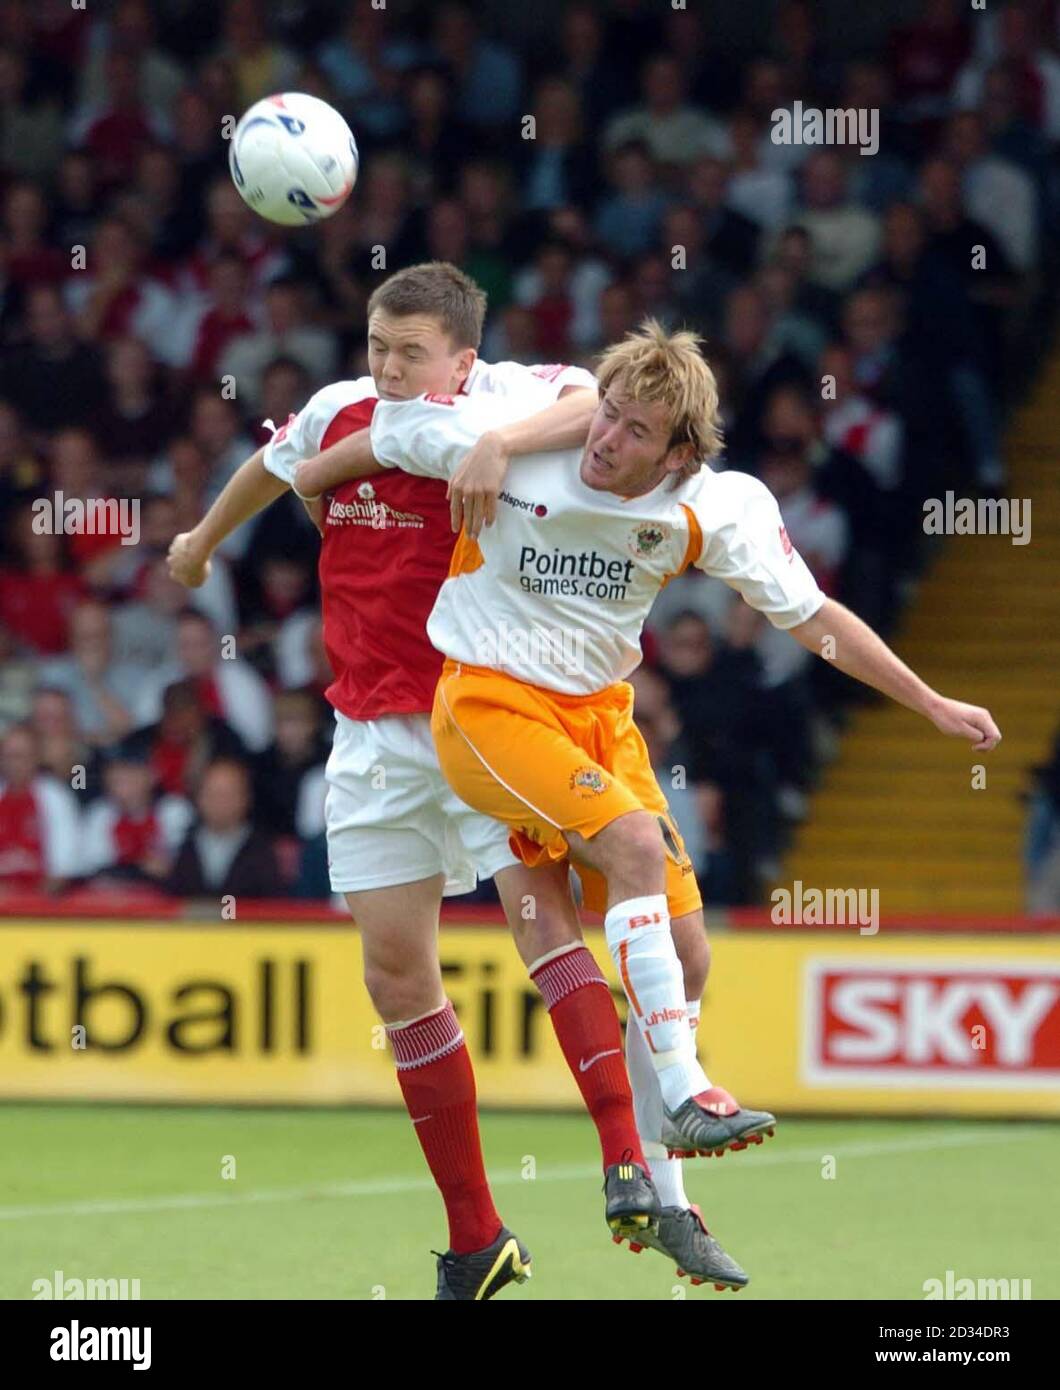 Rotherham's Gregor Robertson (L) battles with Blackpool's Ciaran Donnelly during the Coca-Cola Division One match at Millmoor, Rotherham, Saturday August 27, 2005. PRESS ASSOCIATION Photo. Photo credit should read: John Jones/PA THIS PICTURE CAN ONLY BE USED WITHIN THE CONTEXT OF AN EDITORIAL FEATURE. NO UNOFFICIAL CLUB WEBSITE USE. Stock Photo